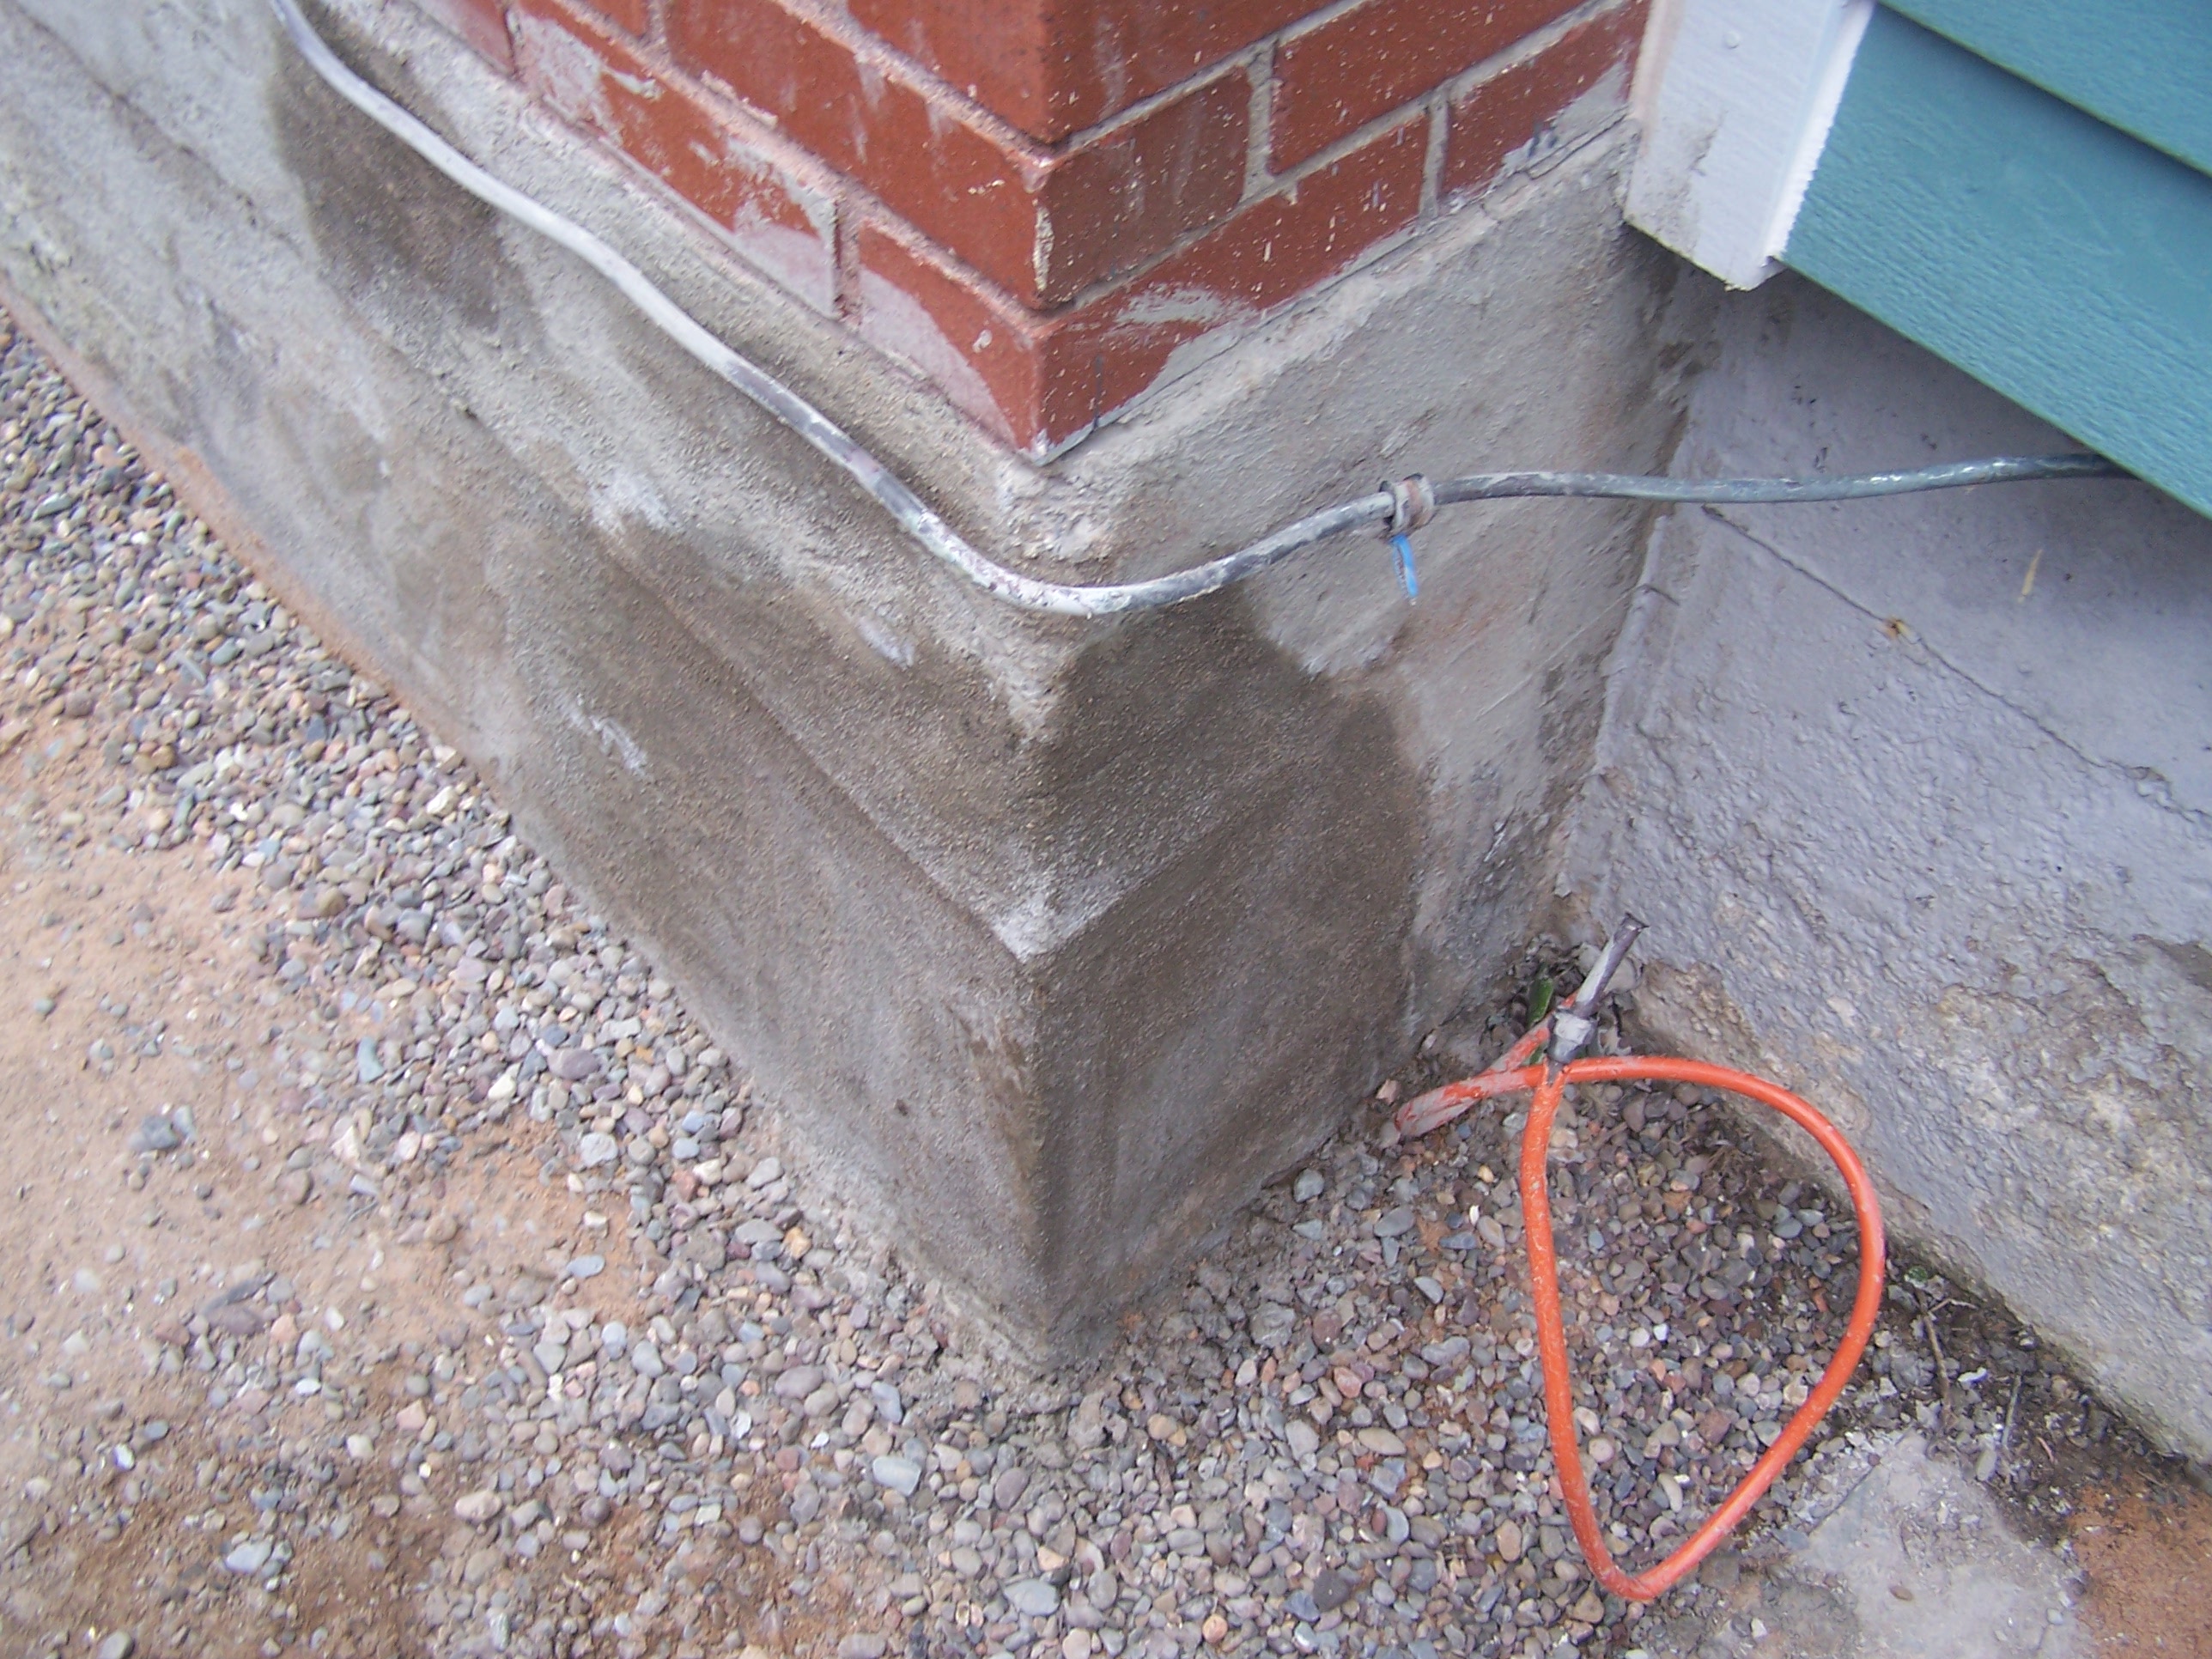 image of concrete foundation-foundation repairs completed in South End Halifax, NS by Pro Chimney Services based in Halifax, NS is providing their concrete foundation repair services to all of the Halifax-Dartmouth Regional Municipality, Bedford, Sackville, Mount Uniacke, Hantsport, Windsor, Wolfville, Kentville, Chester Basin, Mahone Bay, Lunenburg, Bridgewater, Liverpool, Fall River, Wellington, Enfield, Elmsdale, Brookfield, Truro, Musquodoboit Harbour & surrounding areas.